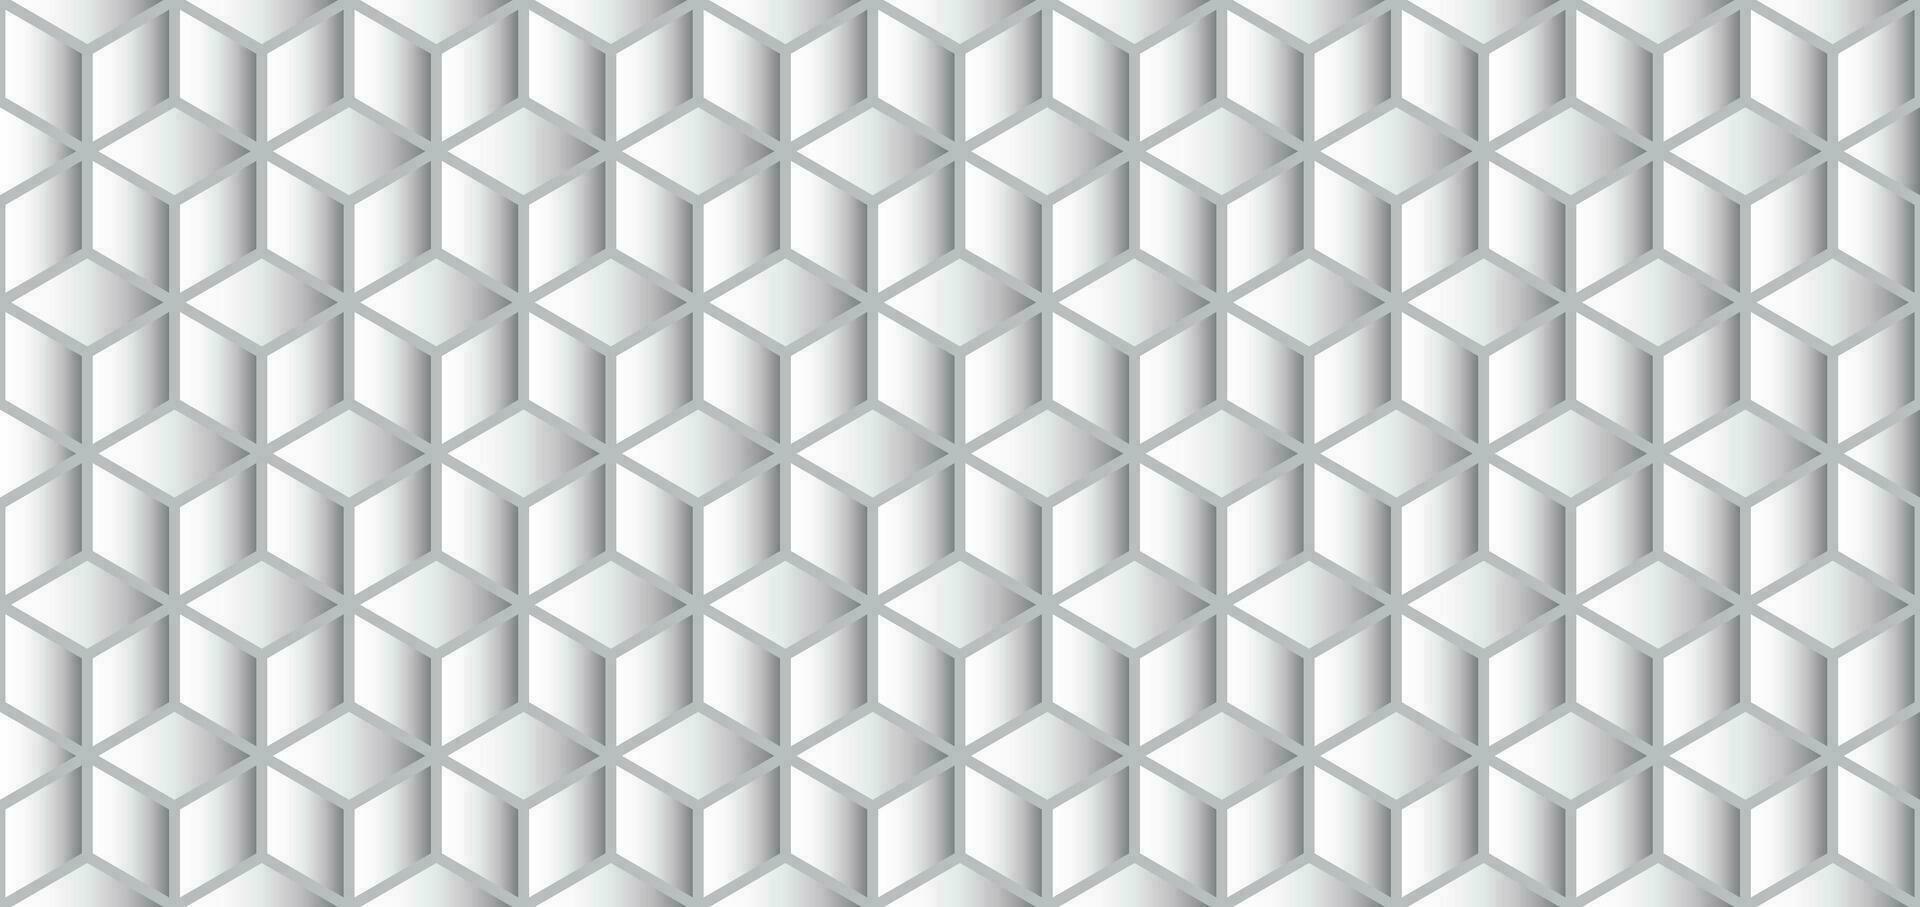 Abstract geometric pattern. Vector seamless background